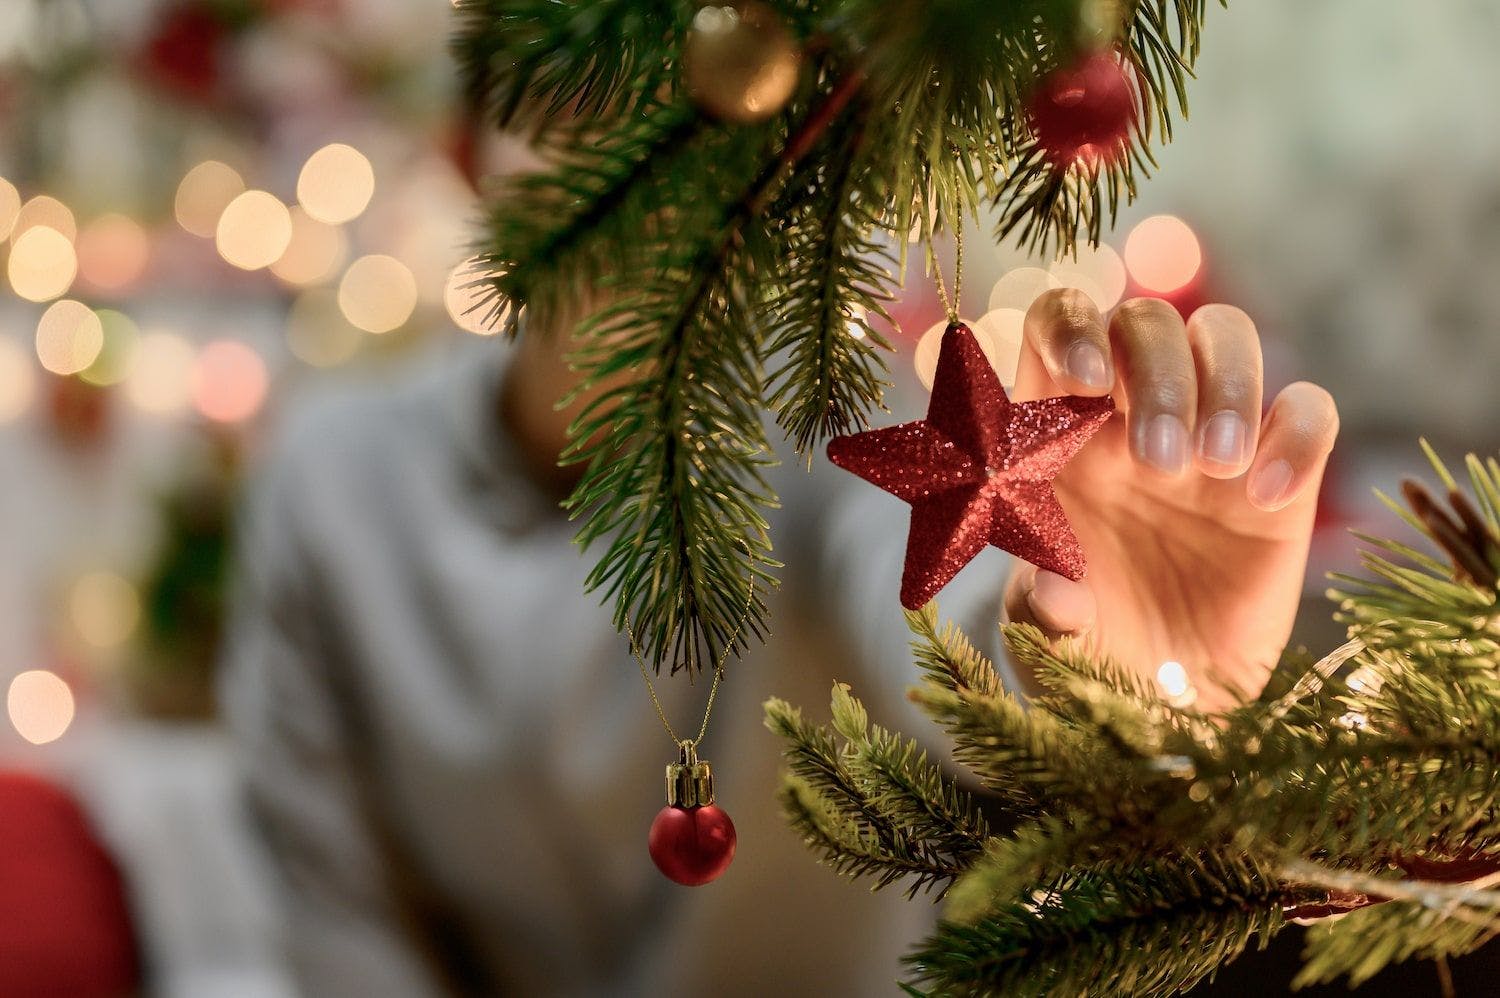 Worried about a loved one’s mental health this Christmas? How to help